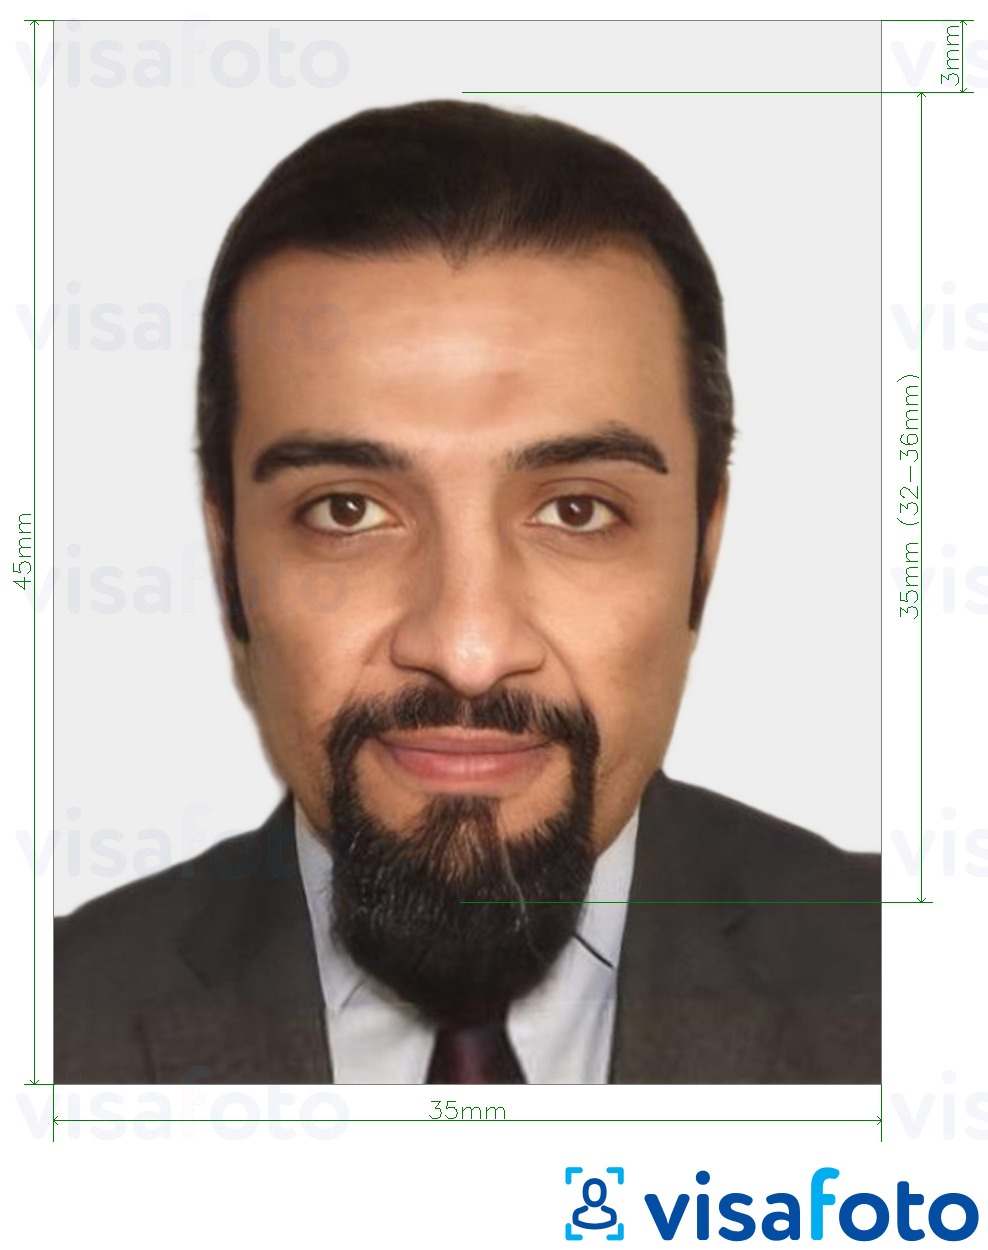 Example of photo for Morocco visa 35x45 mm (3.5x4.5 cm) with exact size specification